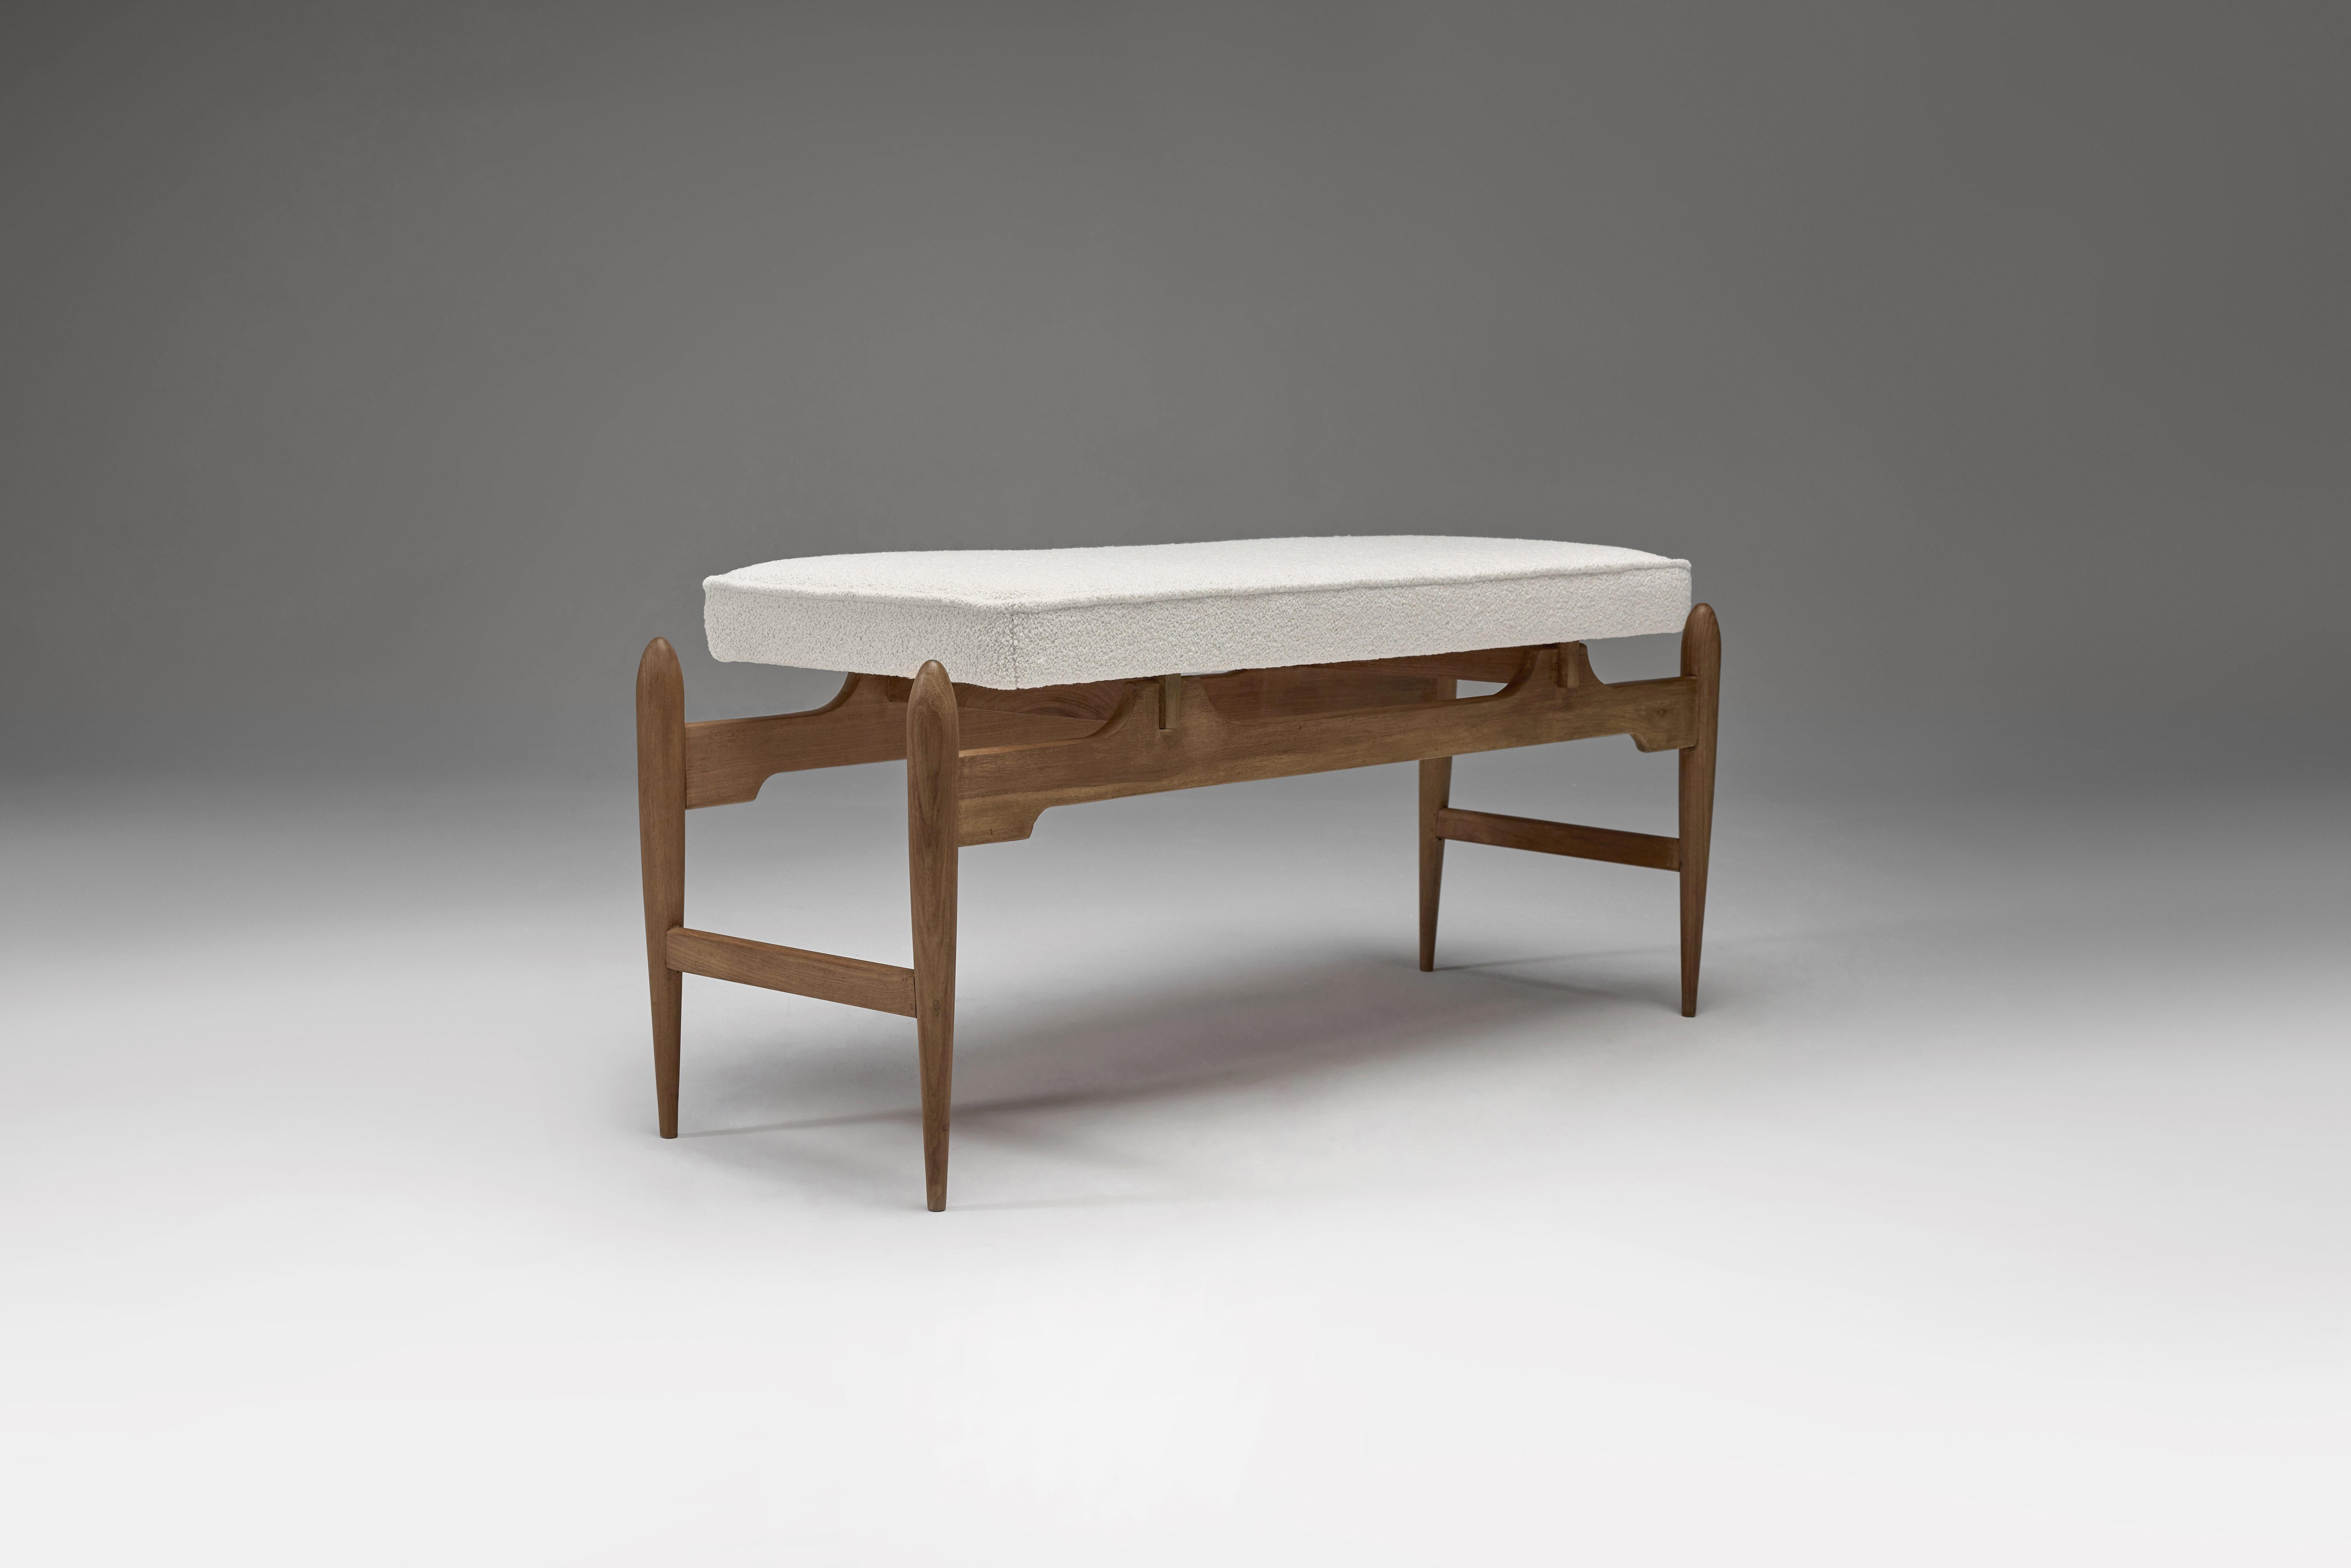 Decorative Italian vintage bench consists of two elements, an upholstered seat that floats on a beautiful solid wood frame. The entire wooden structure, despite the tapered legs, provides excellent stability and support. The attractively visual